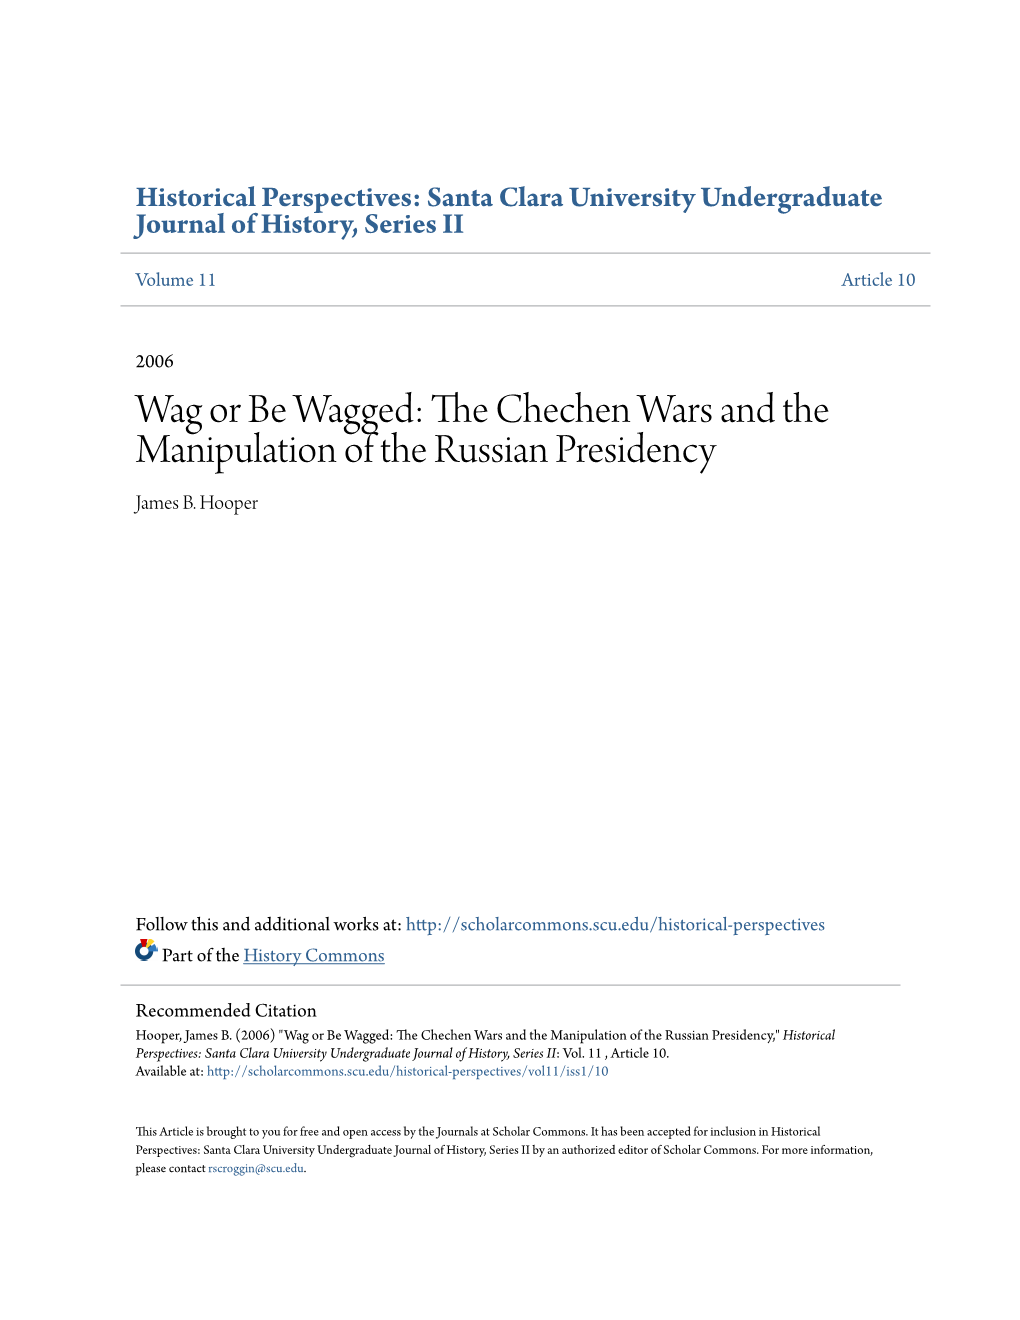 The Chechen Wars and the Manipulation of the Russian